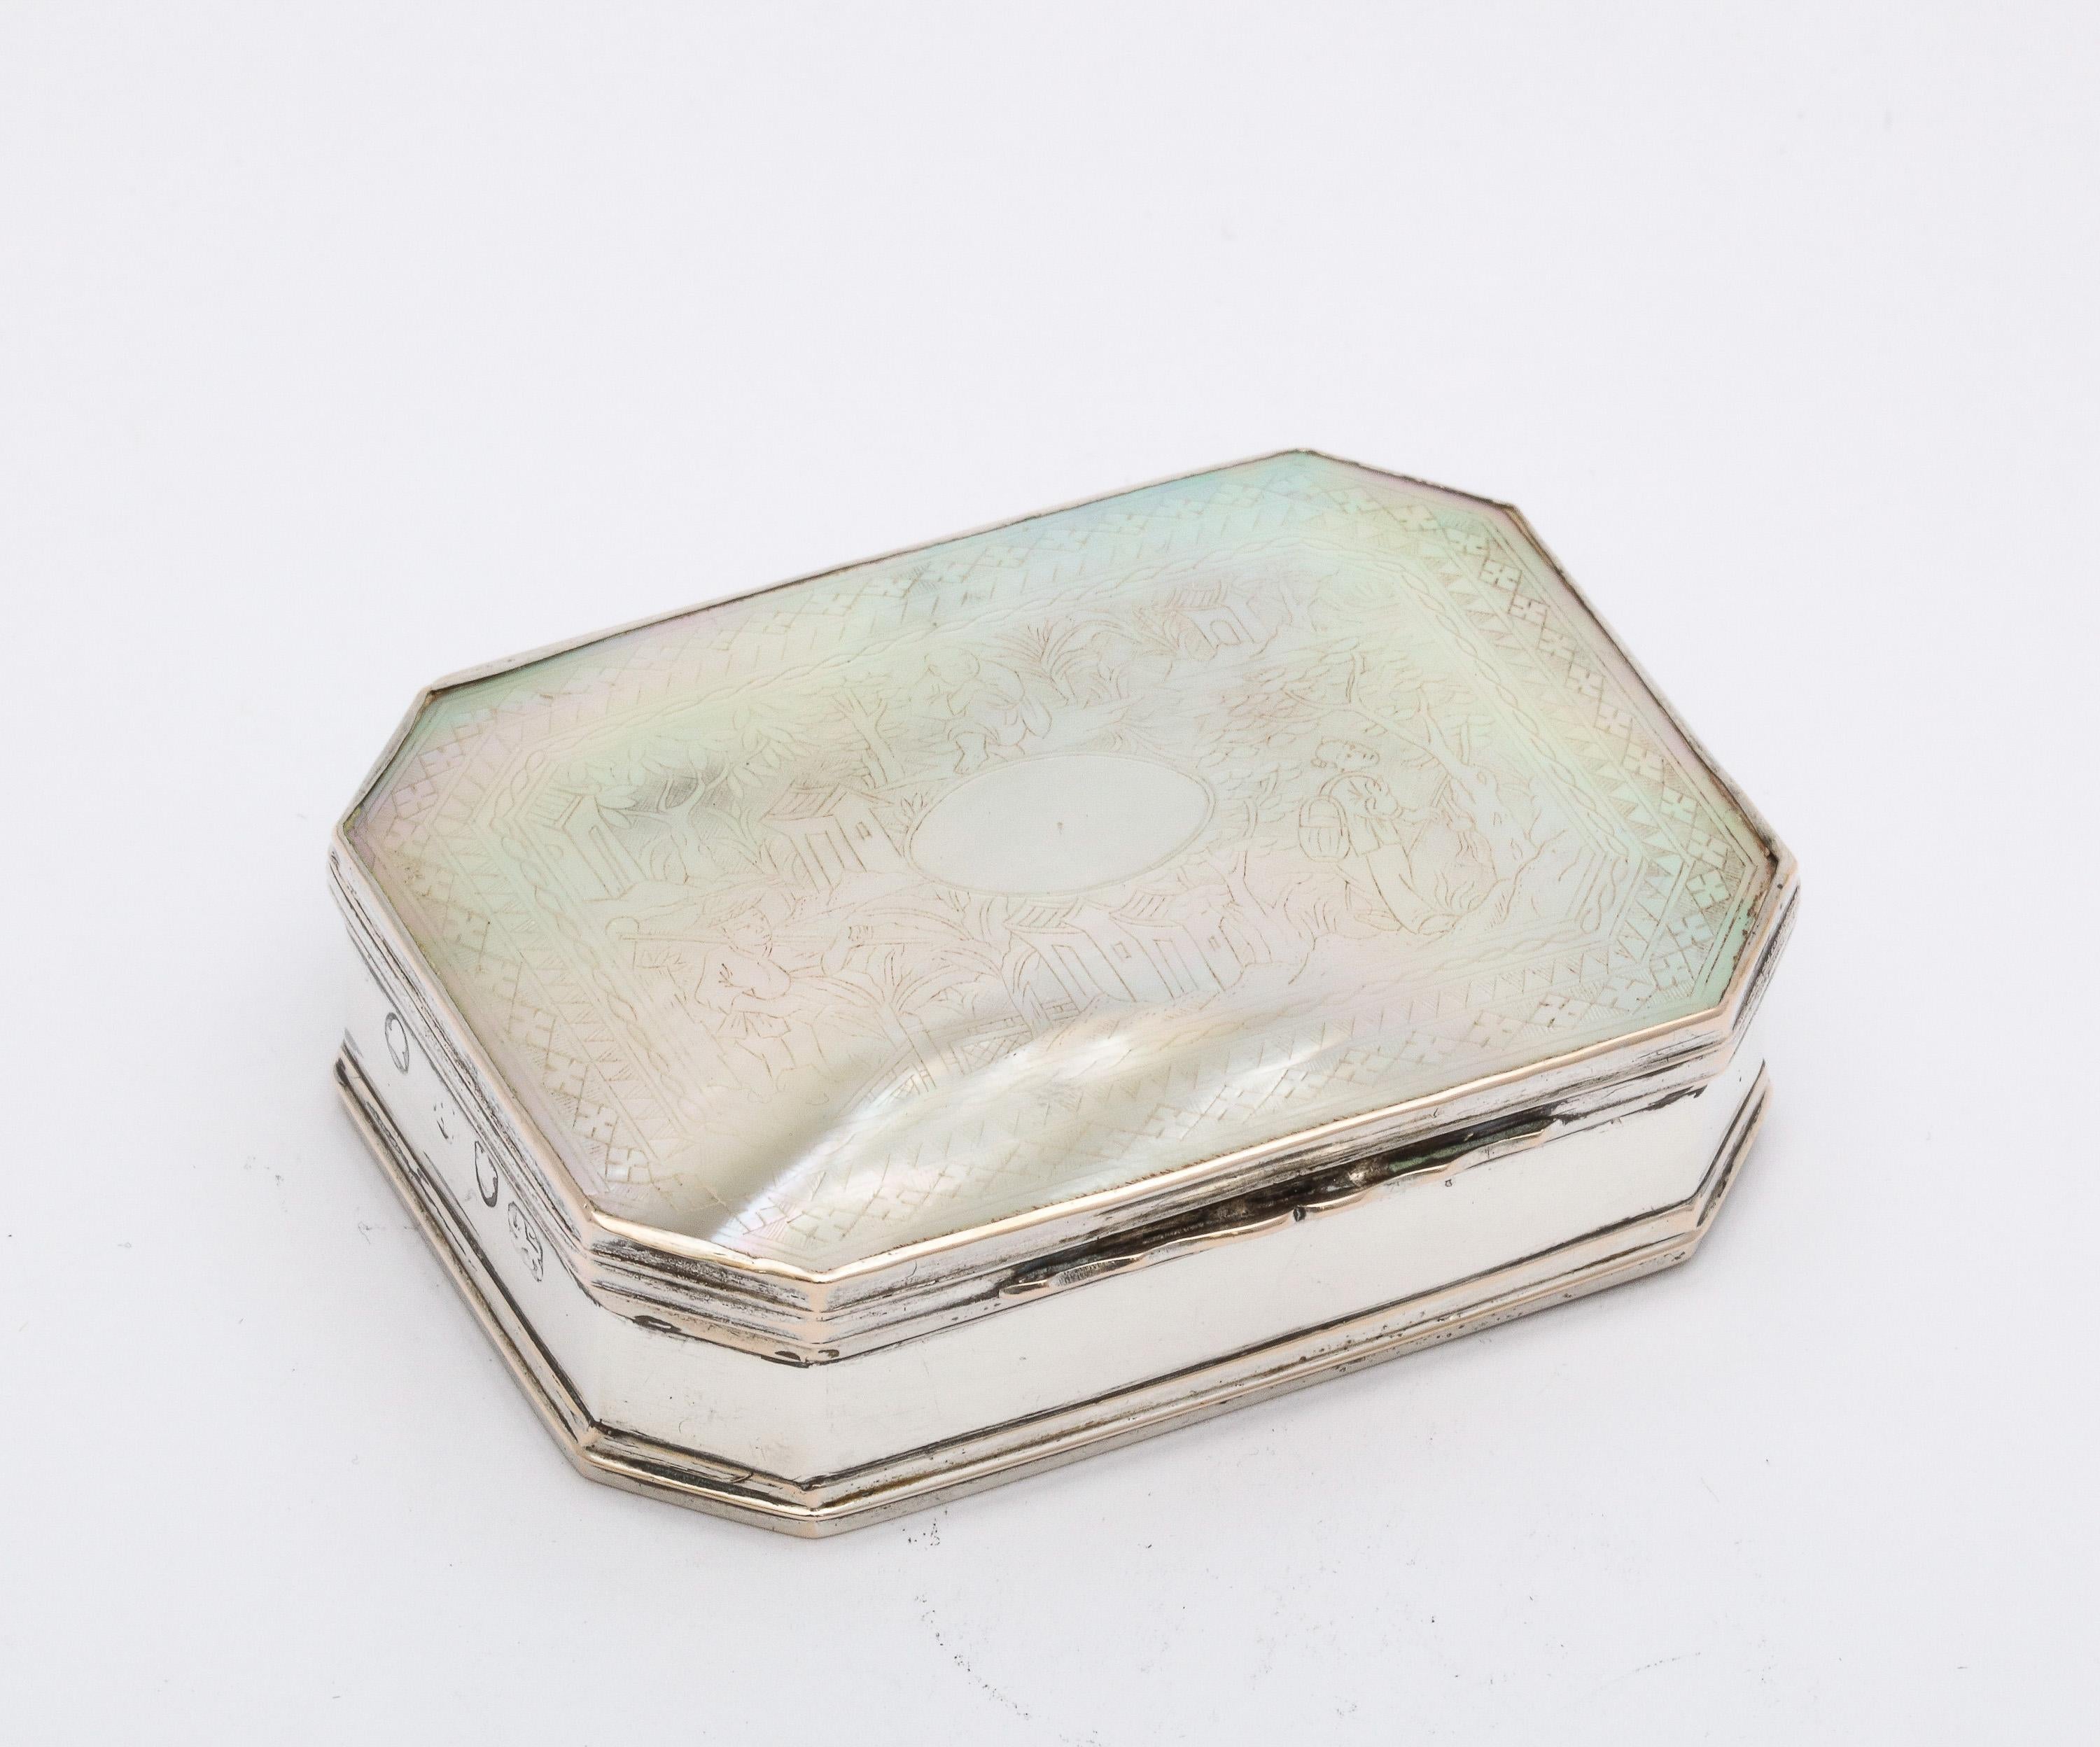 Georgian (George III) Period, sterling silver-mounted etched mother-of-pearl octagonal snuff box with hinged lid, London, year-hallmarked for 1803. The iridescent mother-of-pearl lid is lightly etched with a Chinese country scene (see video). The